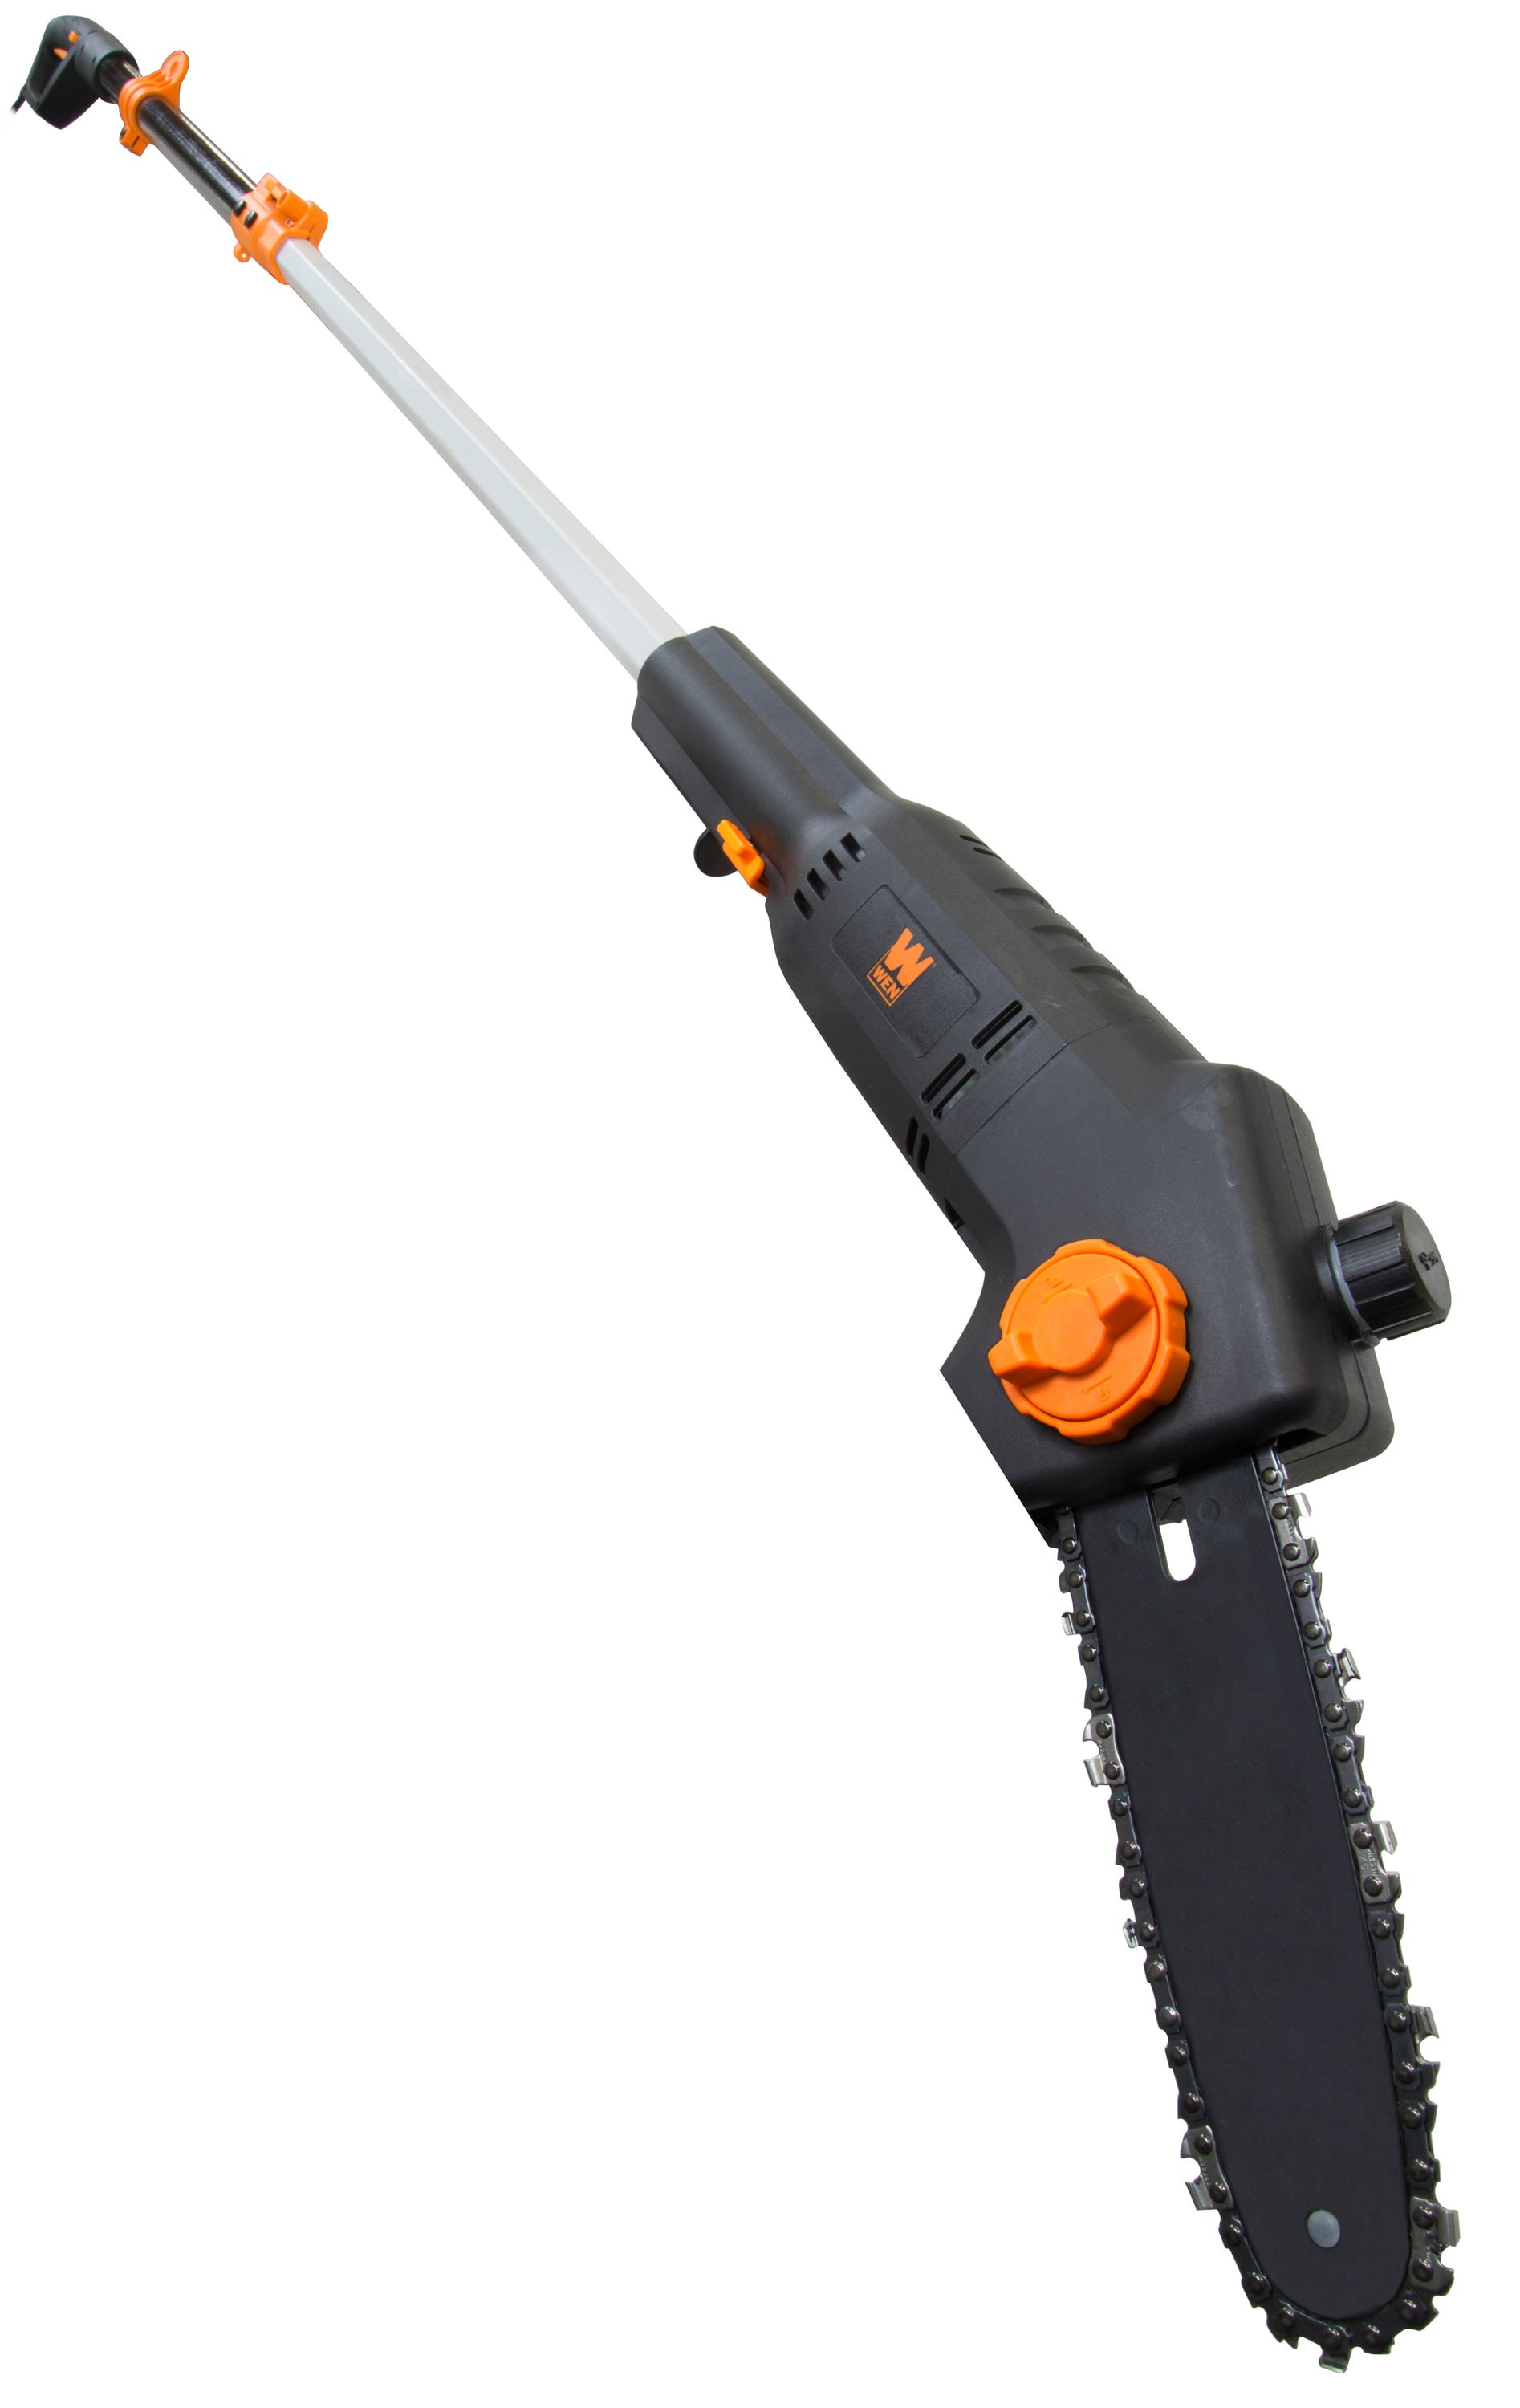 Wen 40421bt 40v Max Lithium Ion 10 Cordless And Brushless Pole